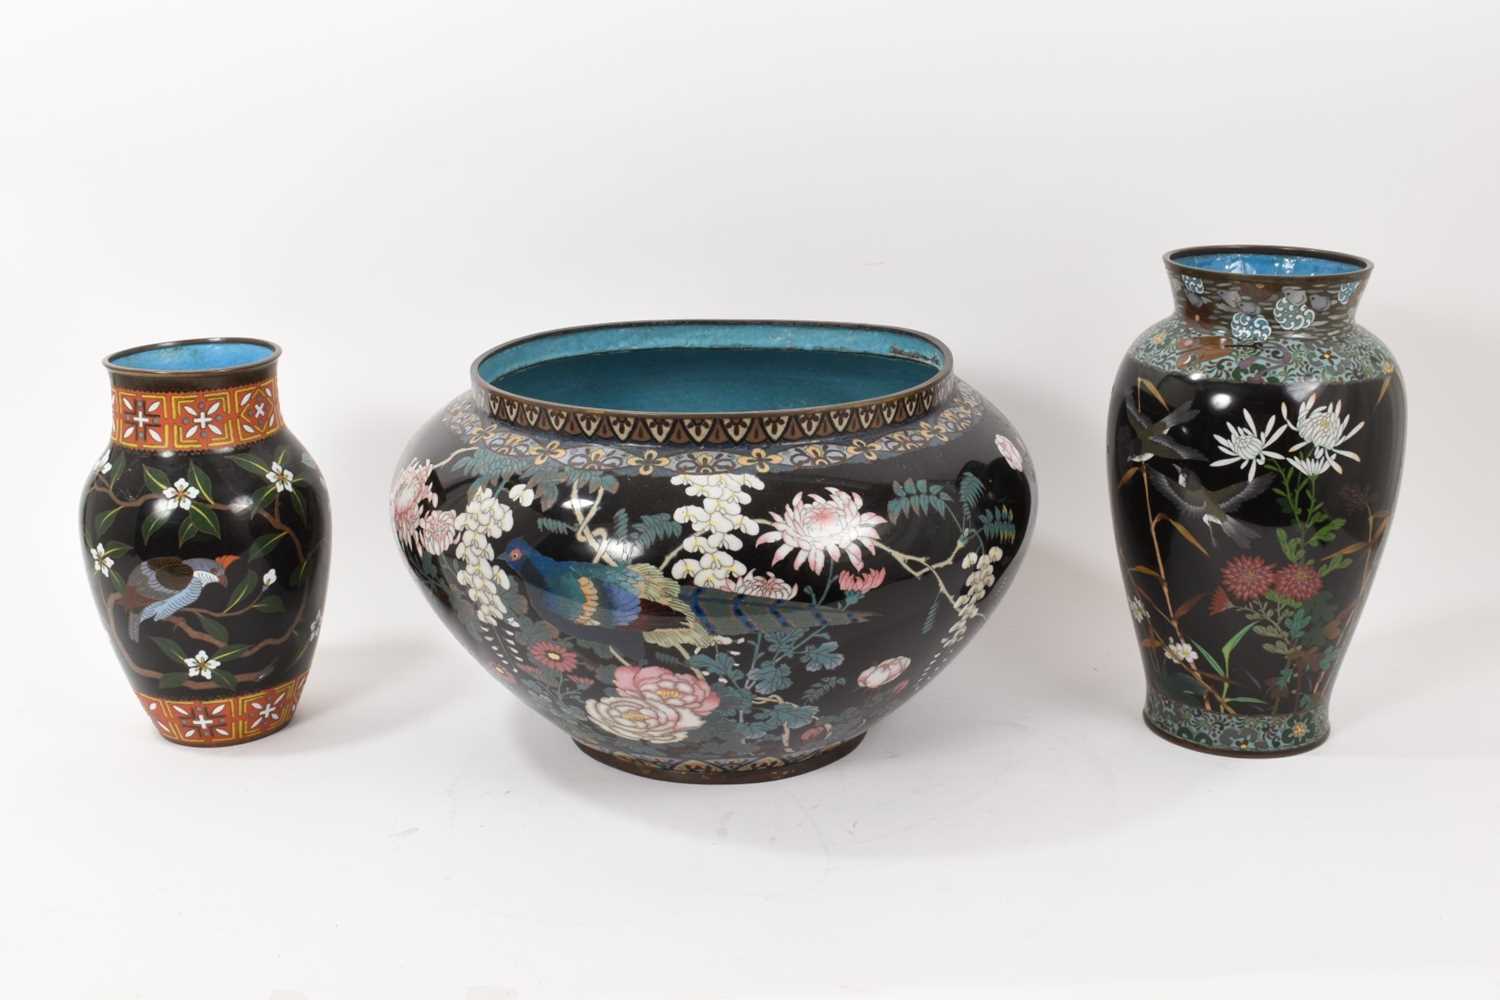 Large Japanese cloisonné jardinière decorated with flowers and birds